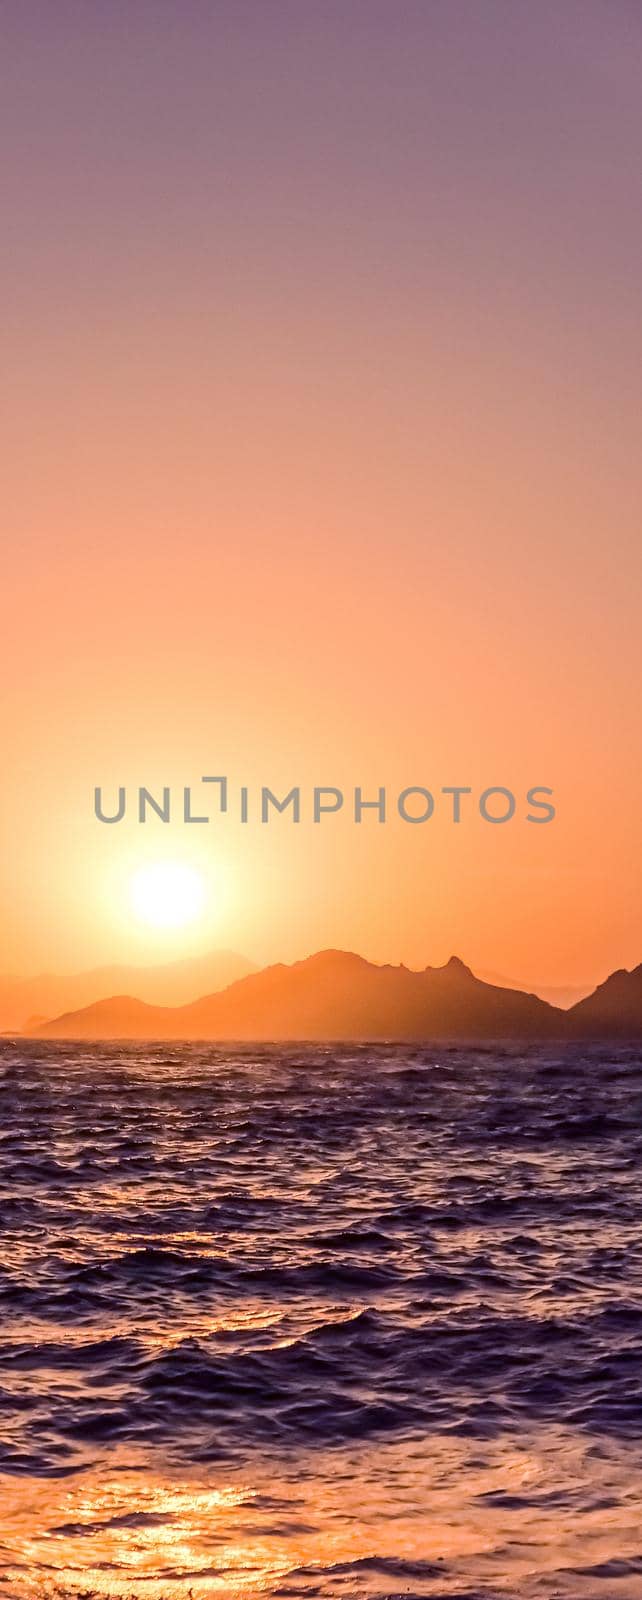 Summer sunset at the Mediterranean sea coast, seascape and mountain view by Anneleven